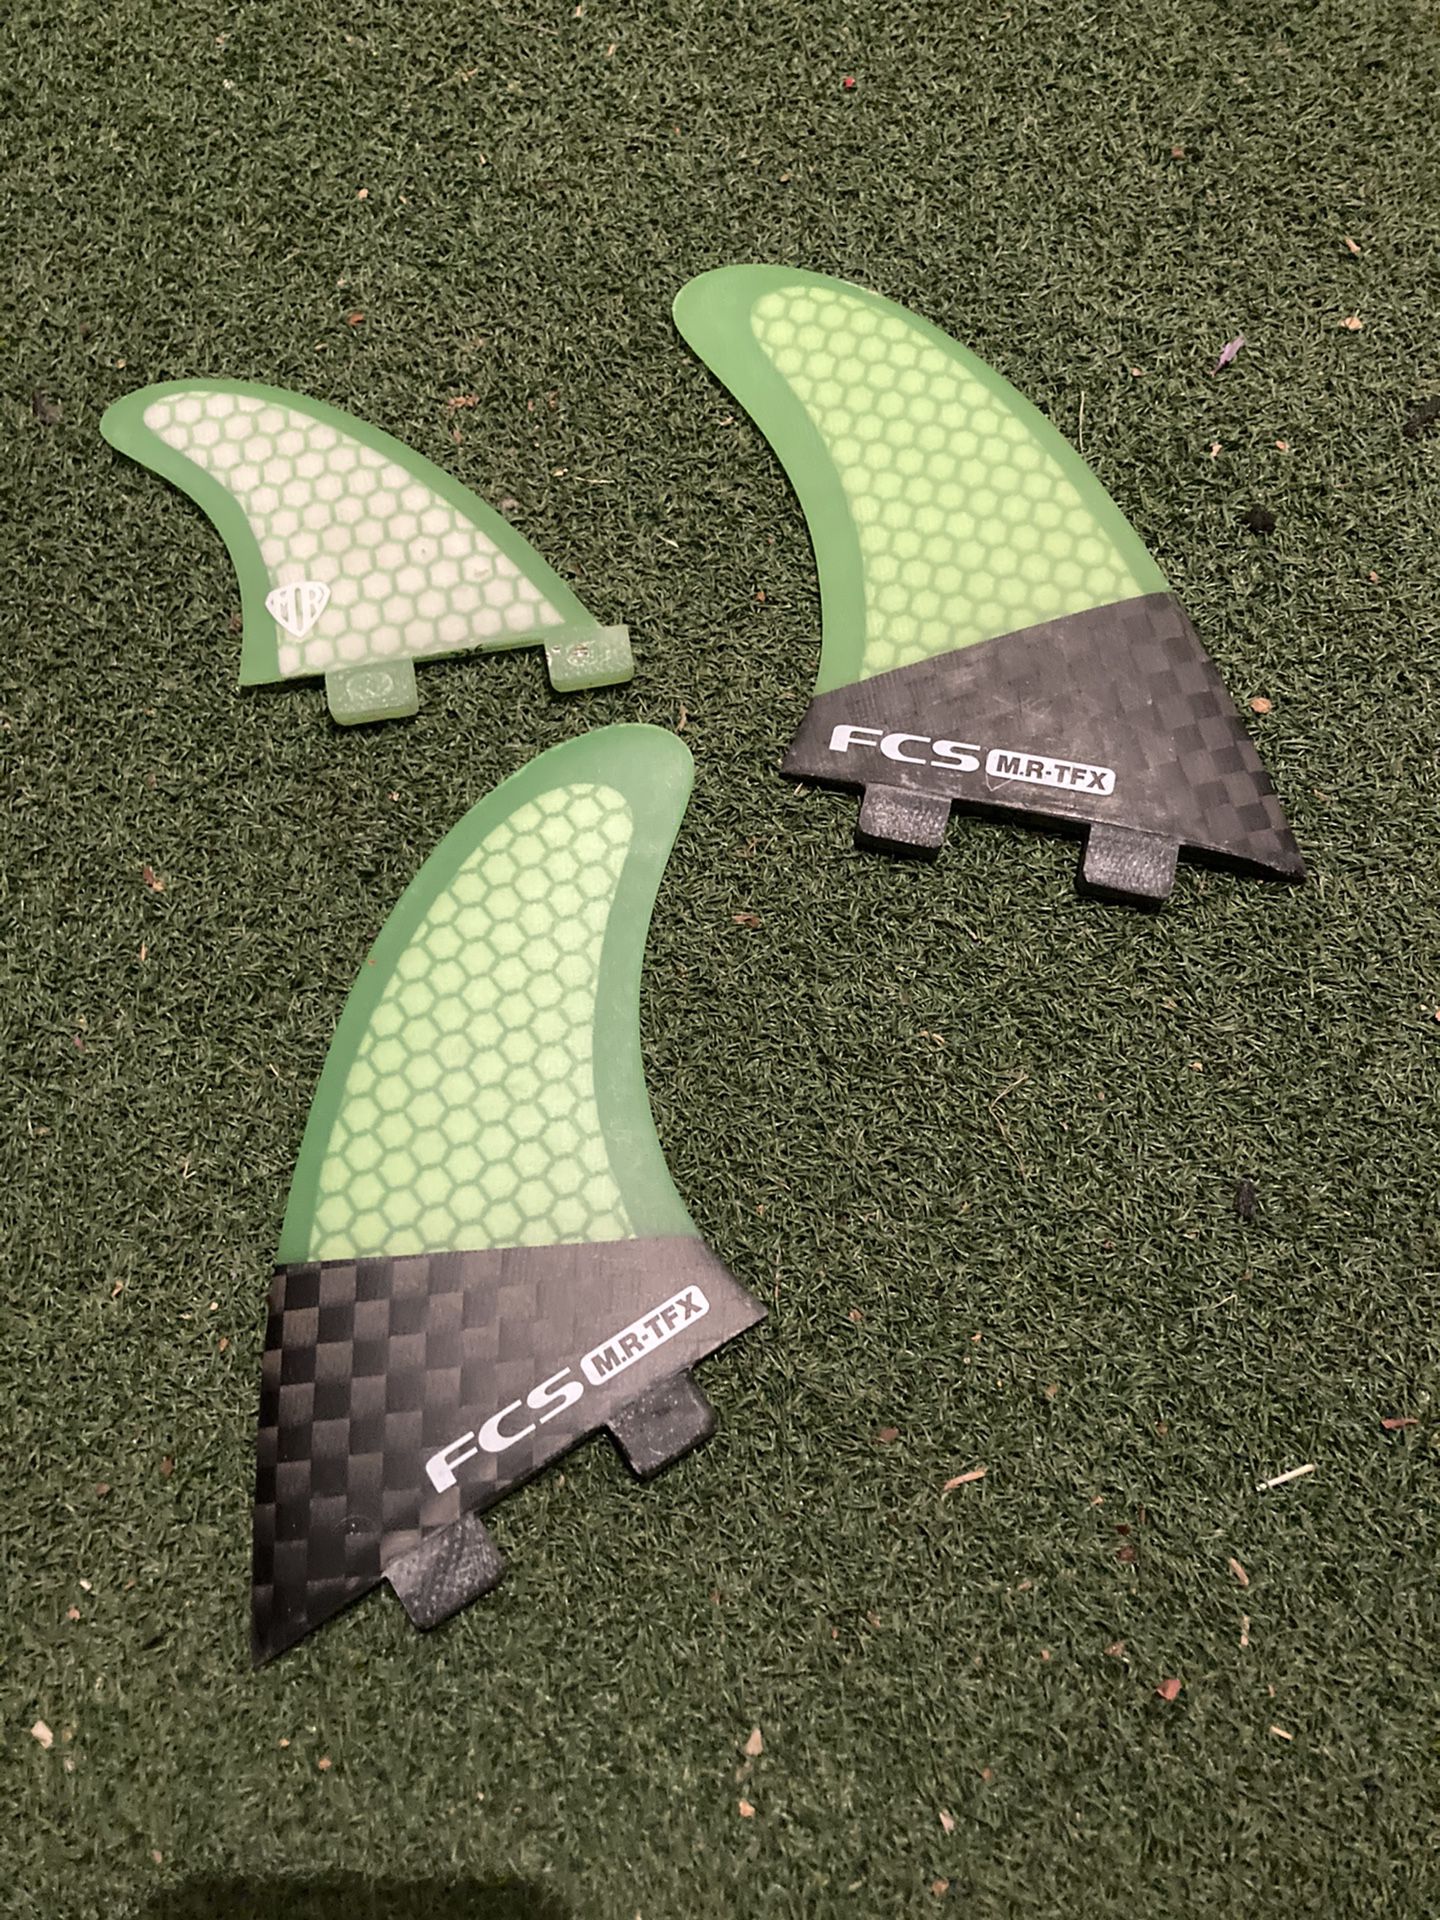 Fcs mark richards twin fins with trailer tin surfboard surf thruster